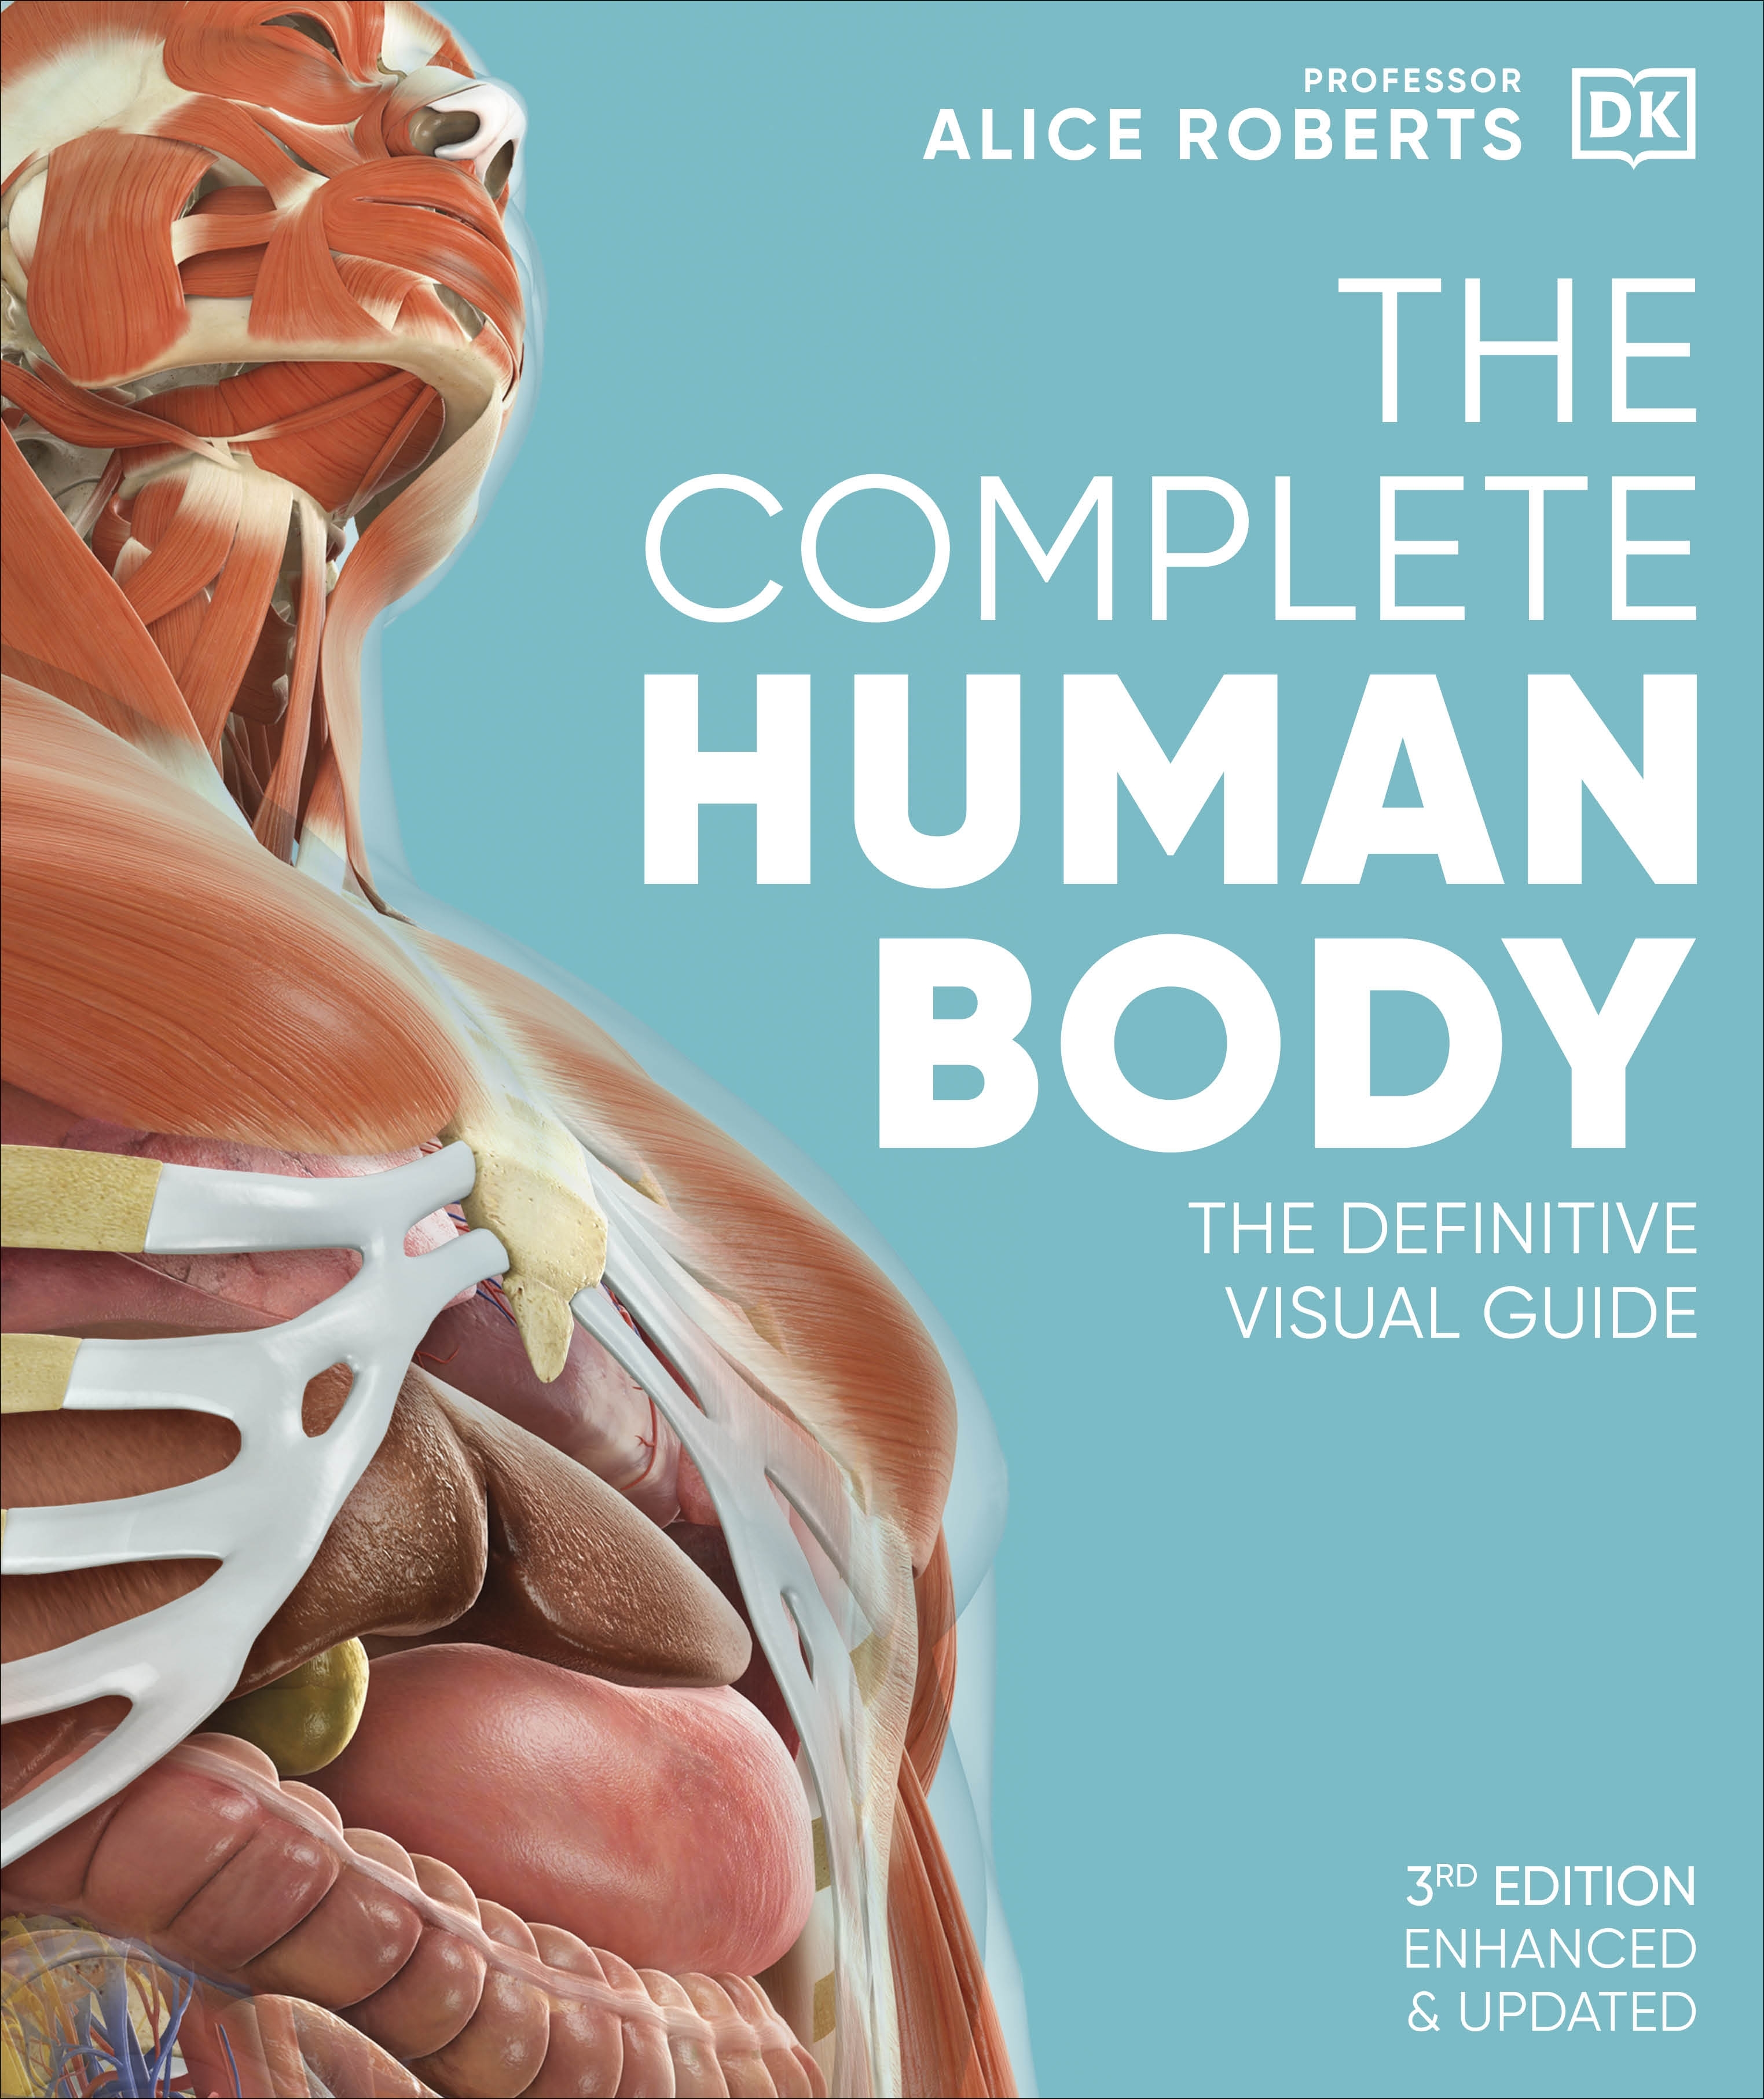 body in book review